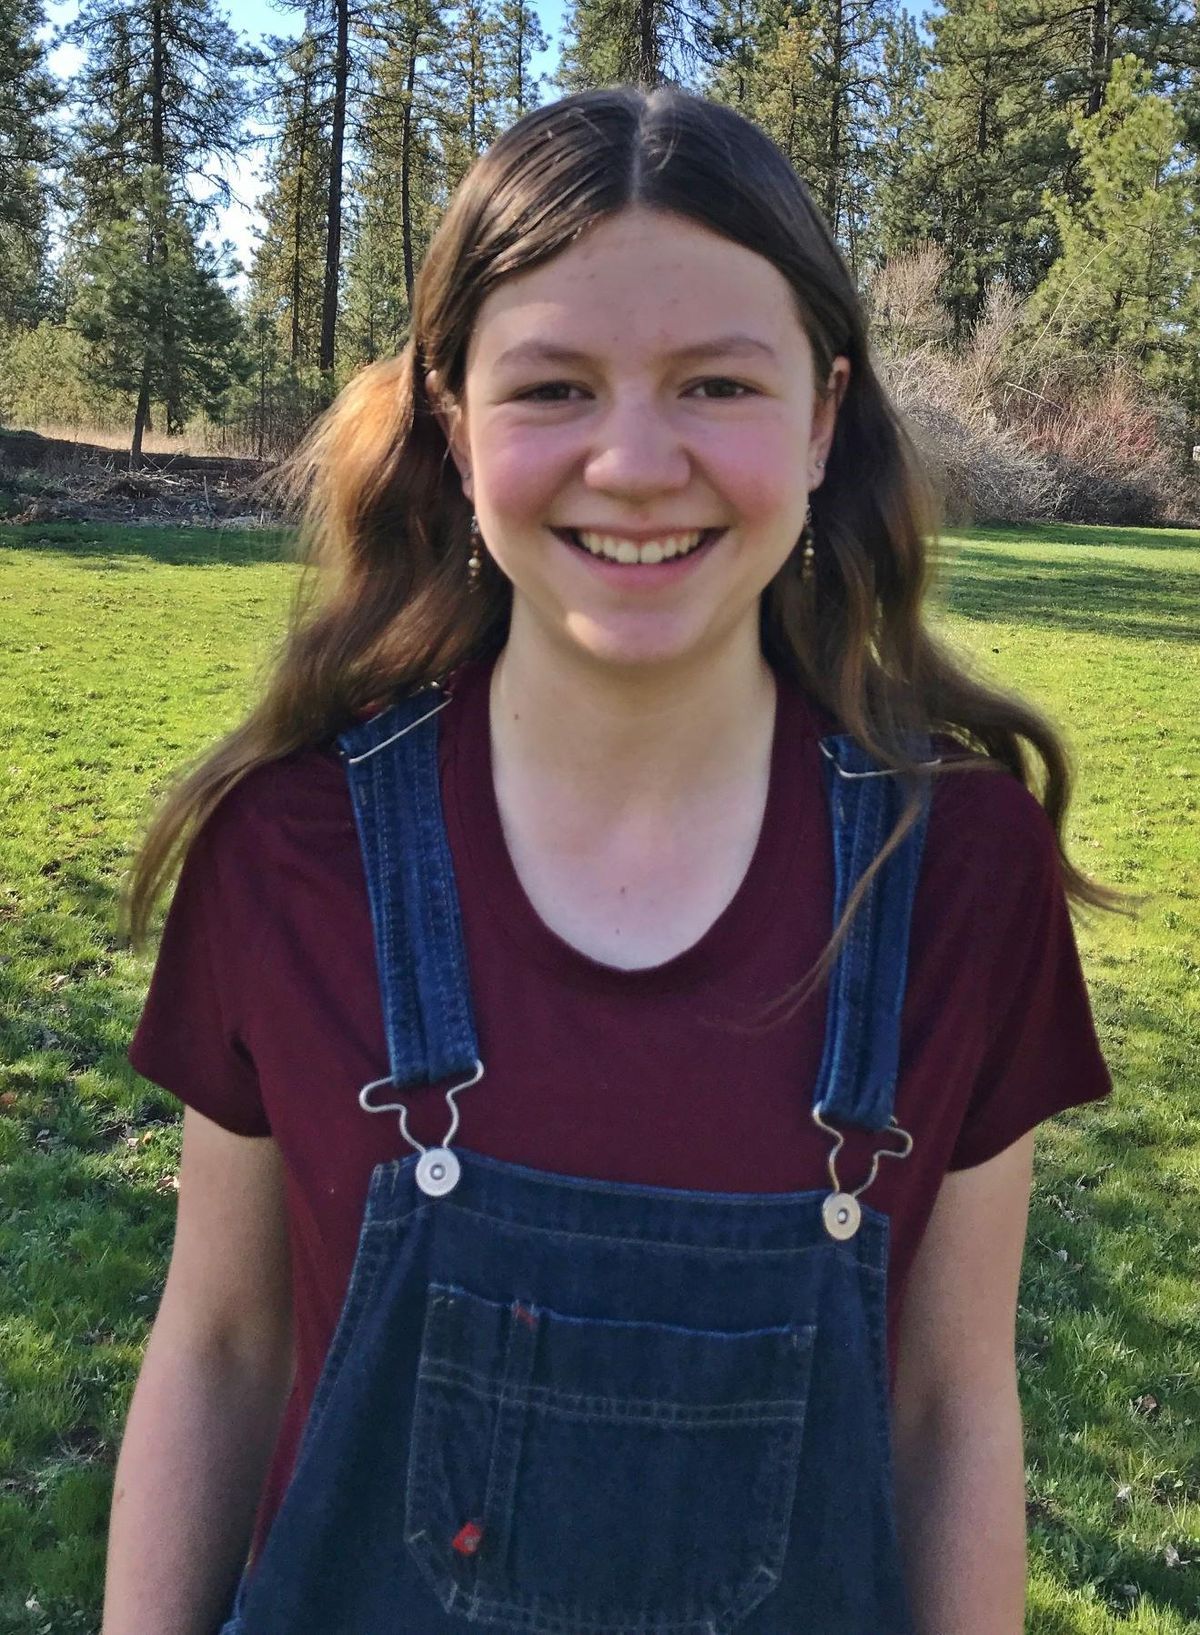 Natalie Williams, a seventh-grade student of Vicki Singleton and Rick Havermann at TEC at Bryant, has won the middle school division of the 2020 Eva Lassman Memorial Creative Writing Contest with her essay, “Hold On to the Light.” (Courtesy)